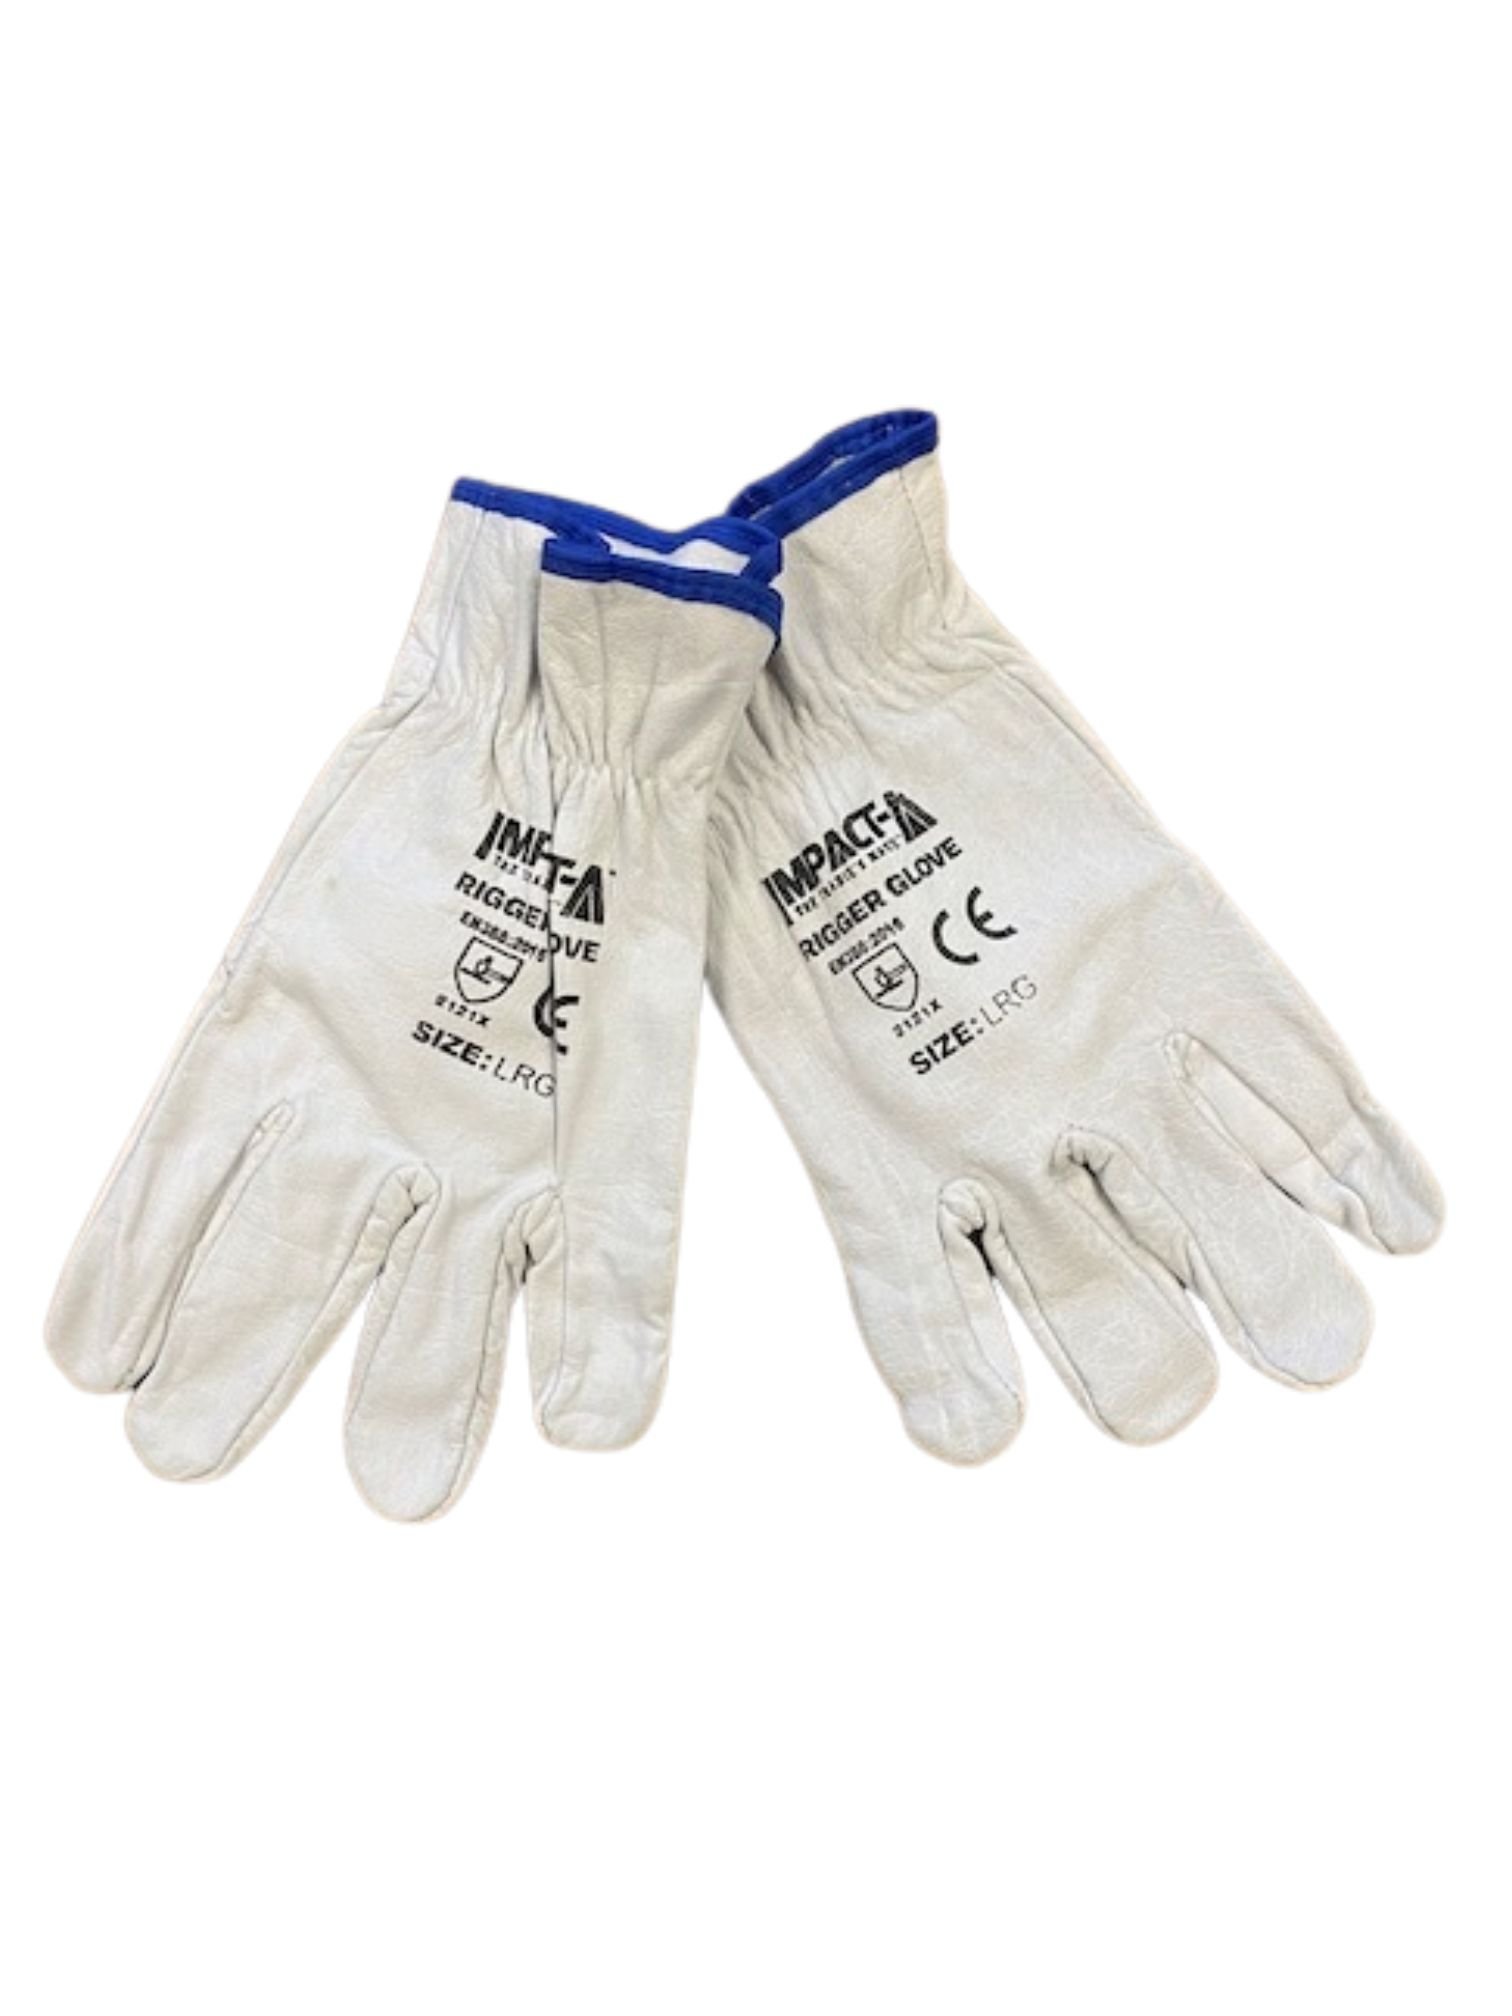 IMPACT-A RIGGER GLOVES